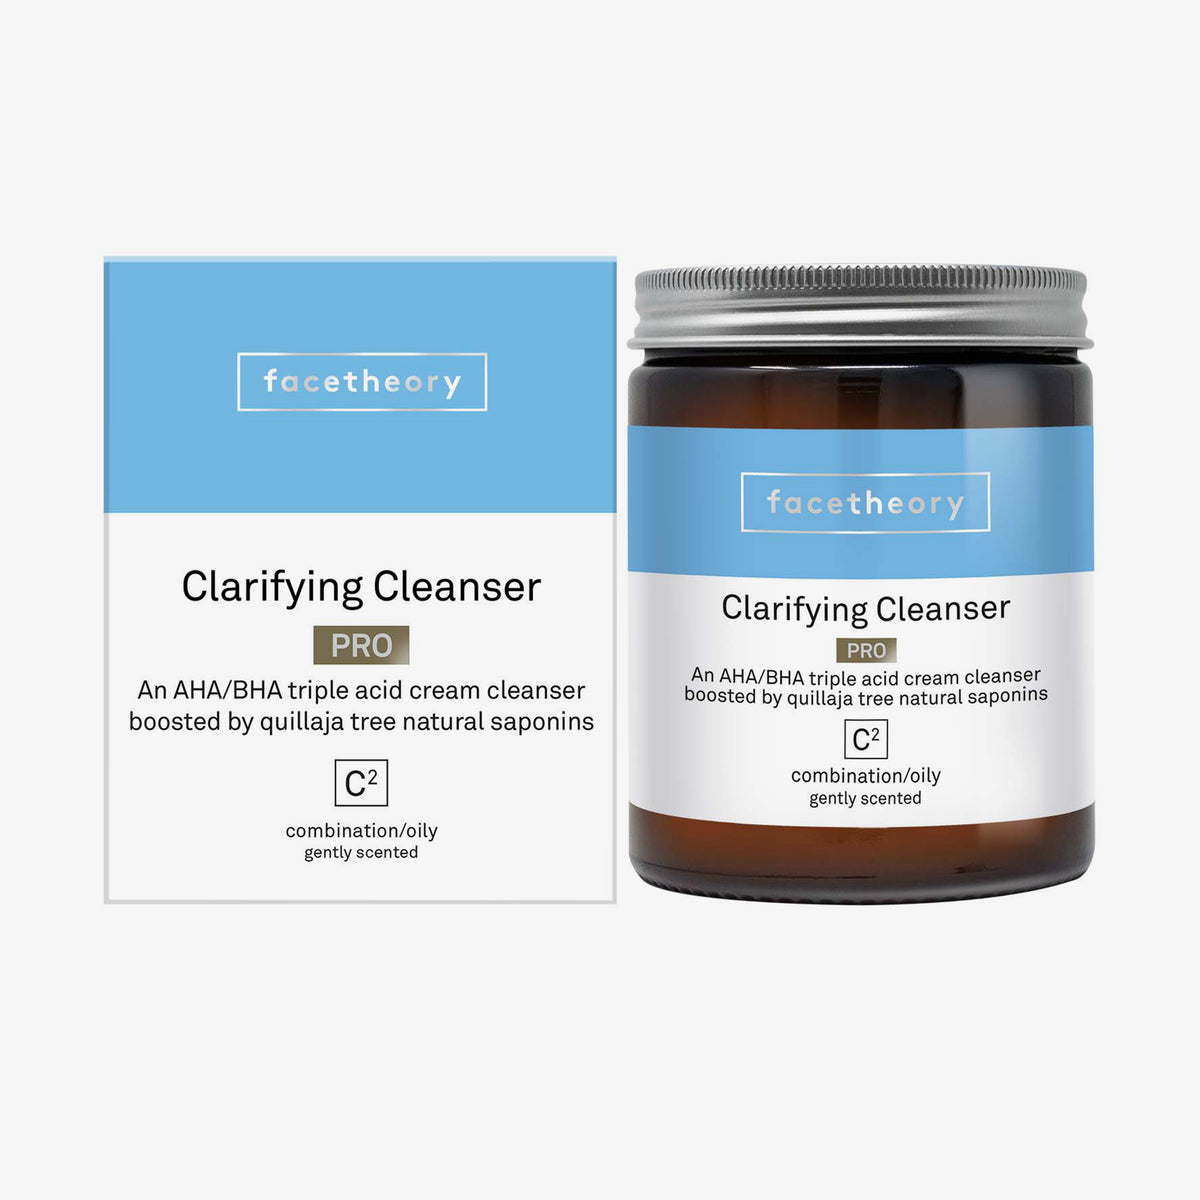 facetheory | Clarifying Cleanser C2 Pro